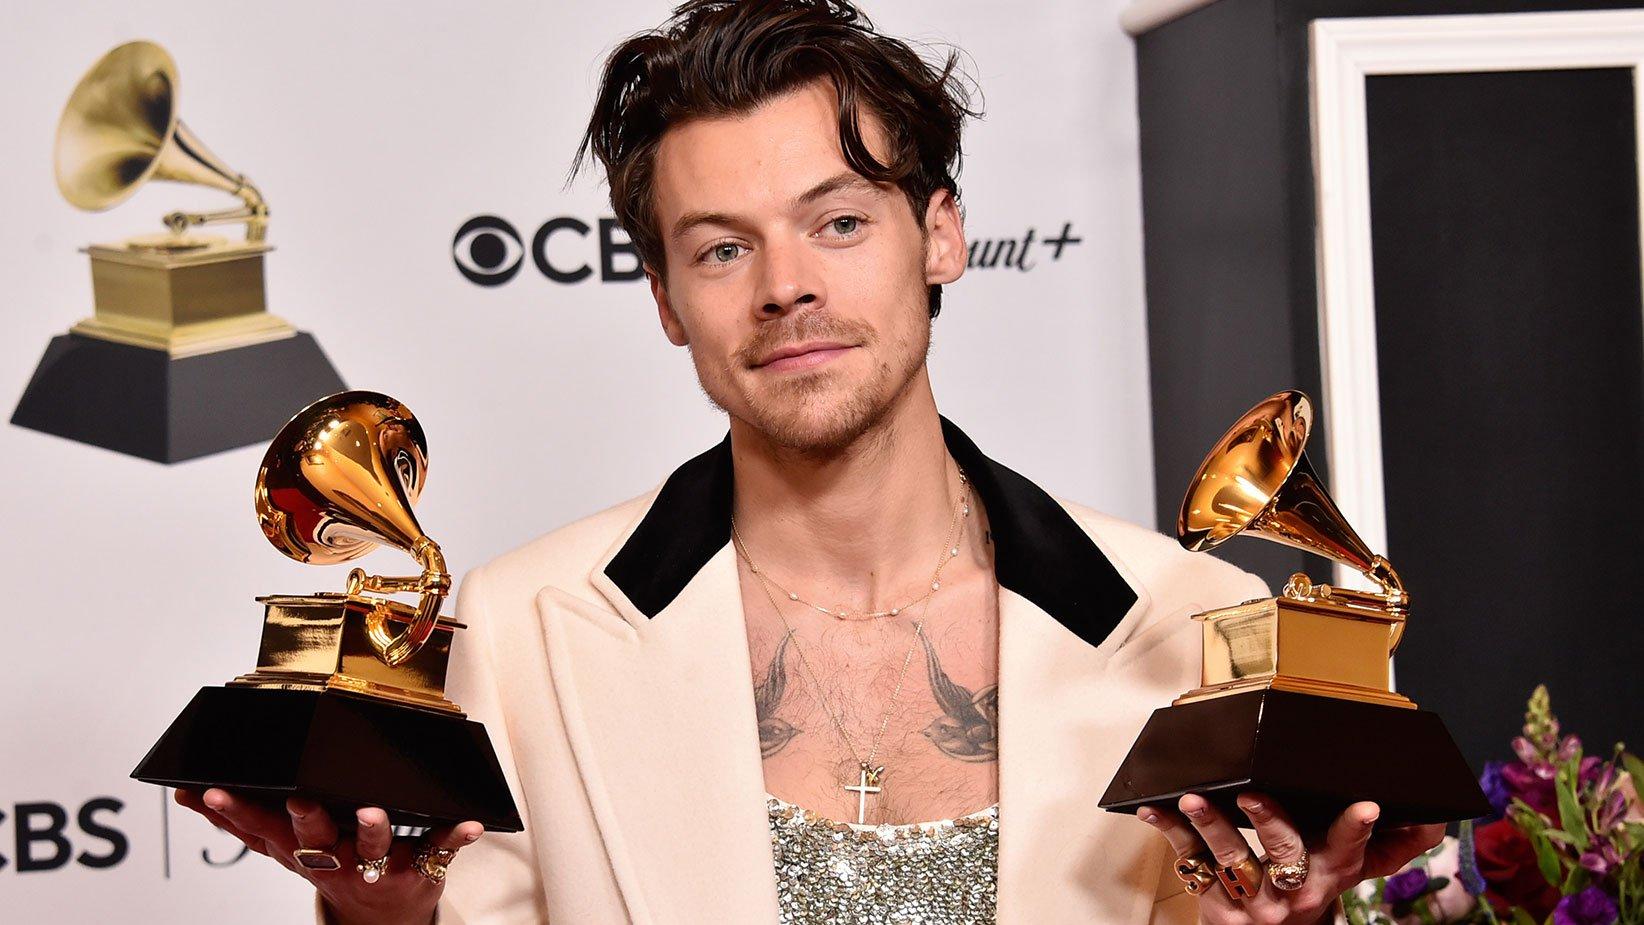 Heres What Harry Styles, Brandi Carlile and More Had To Say Backstage At The 2023 GRAMMYs GRAMMY